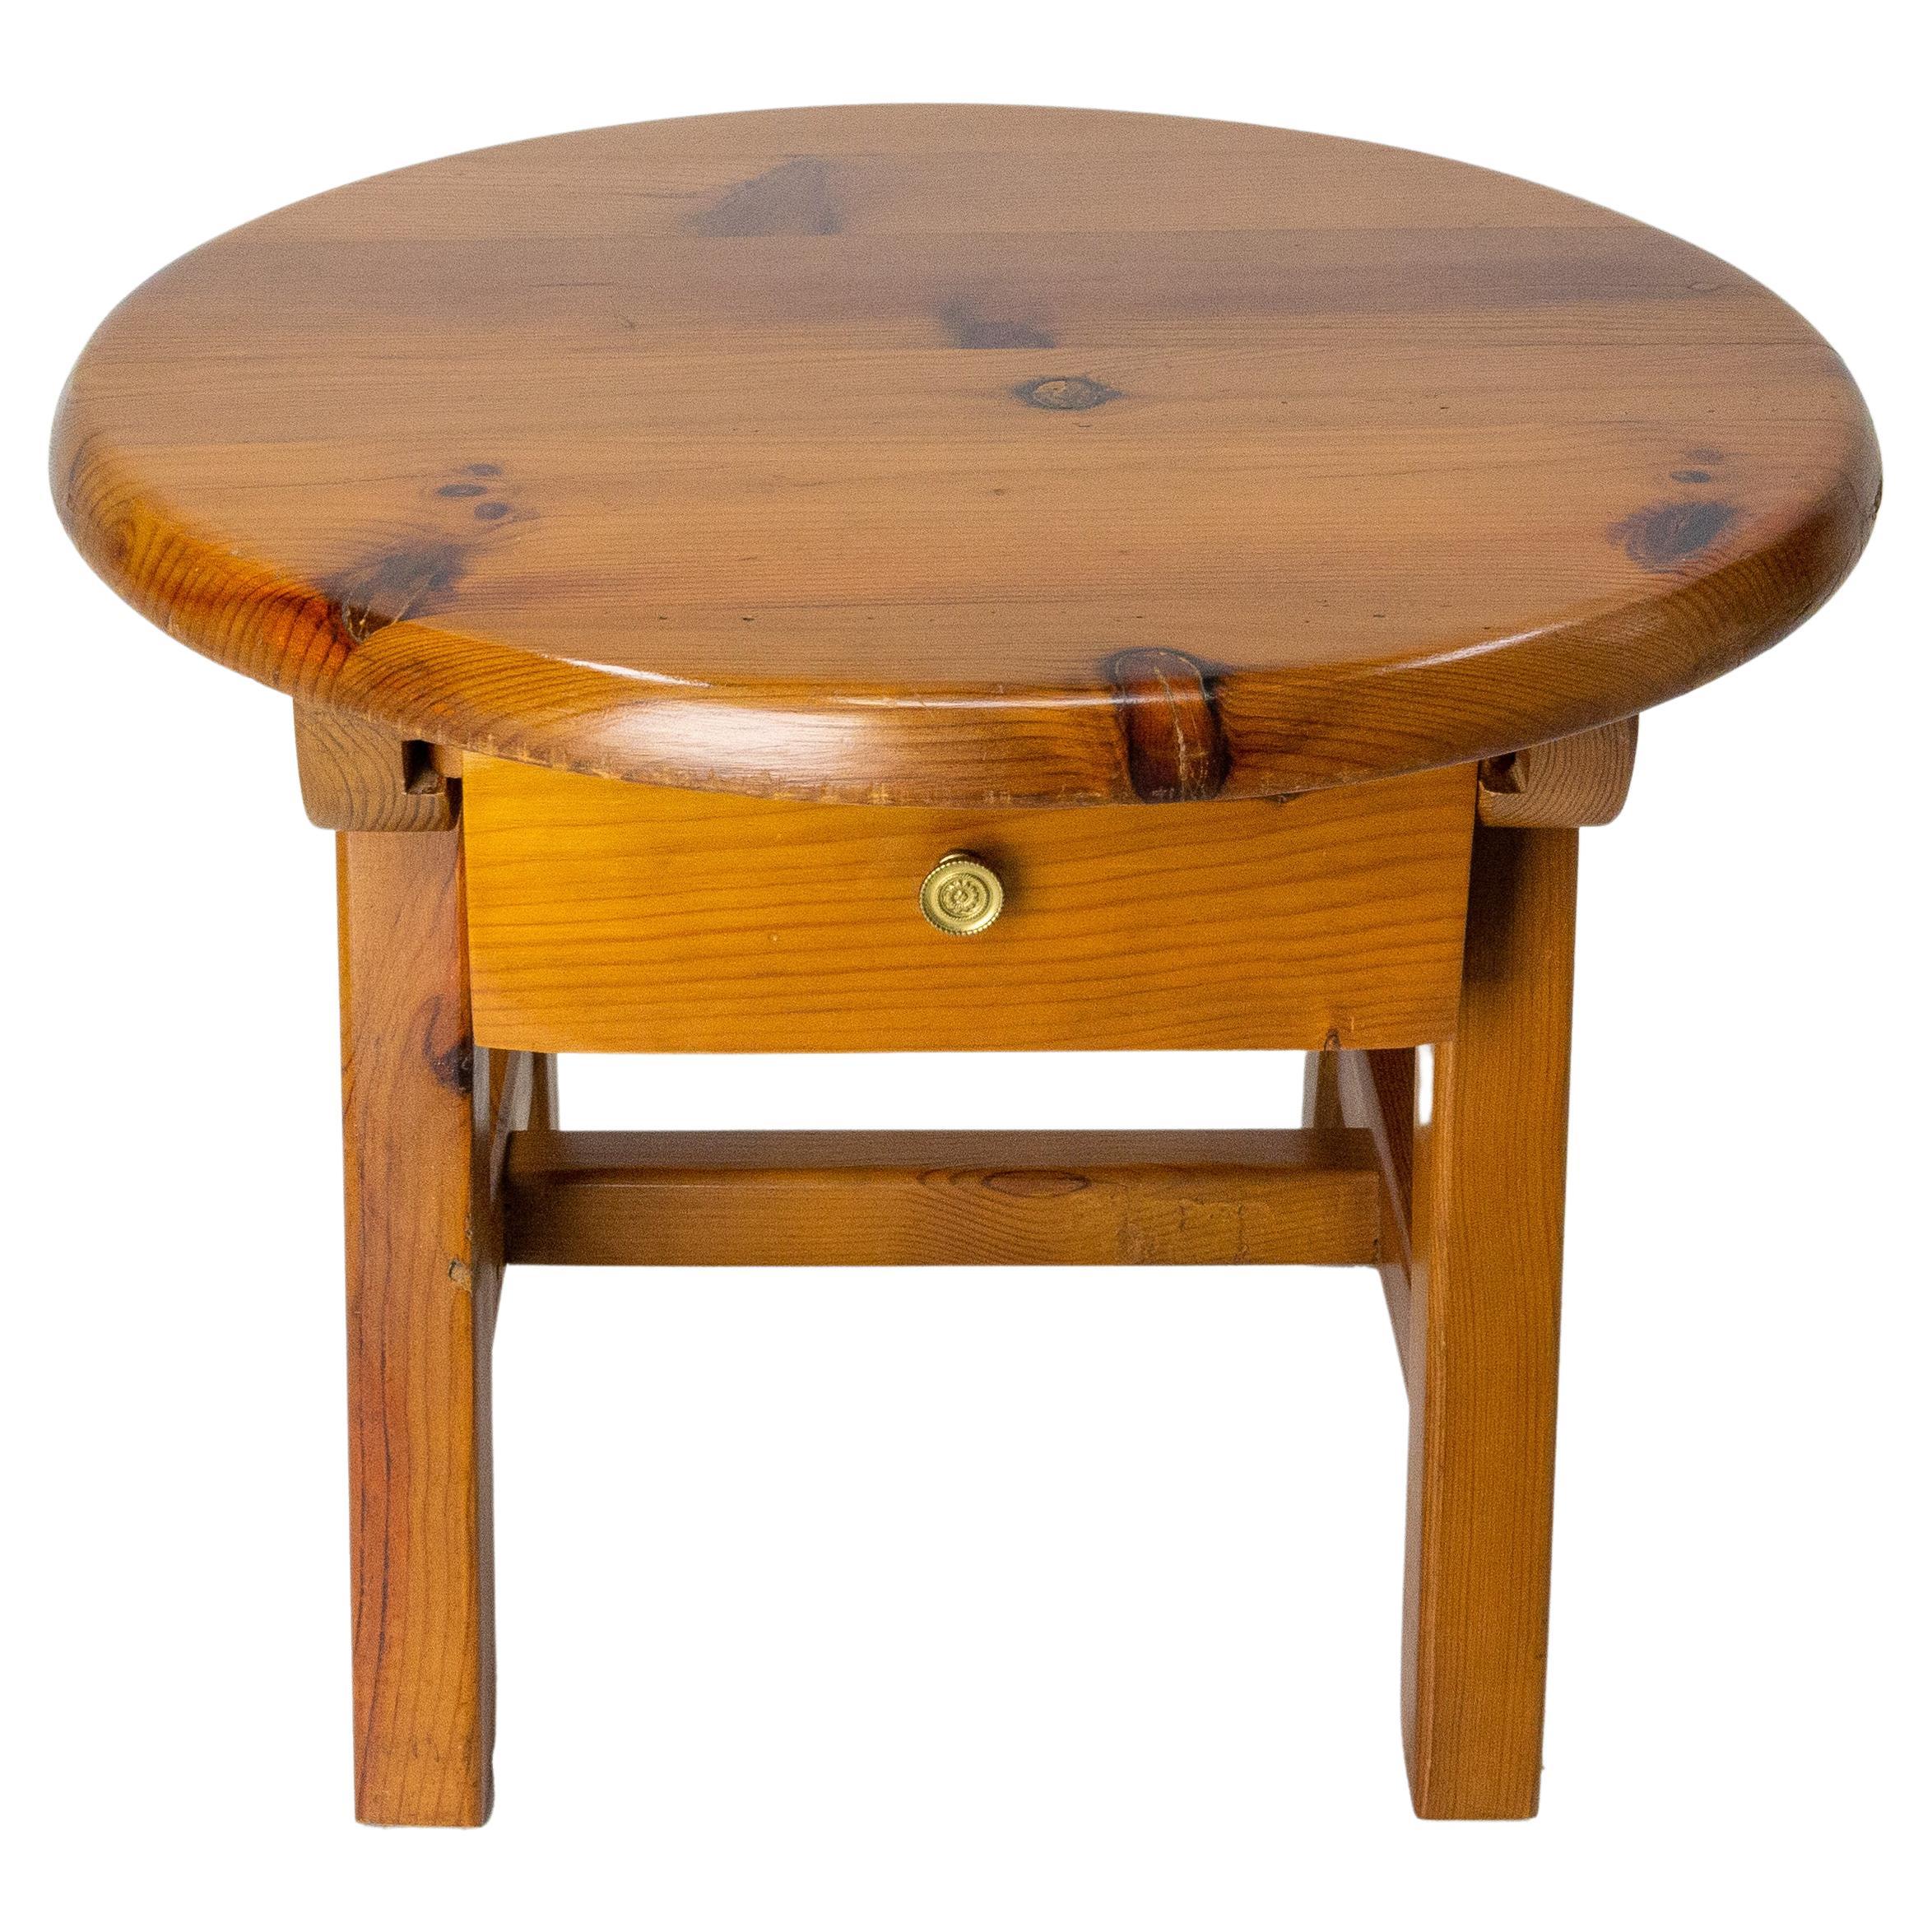 French Round Pine Coffee Table or Nightstand Table with Drawer, c. 1970 For Sale